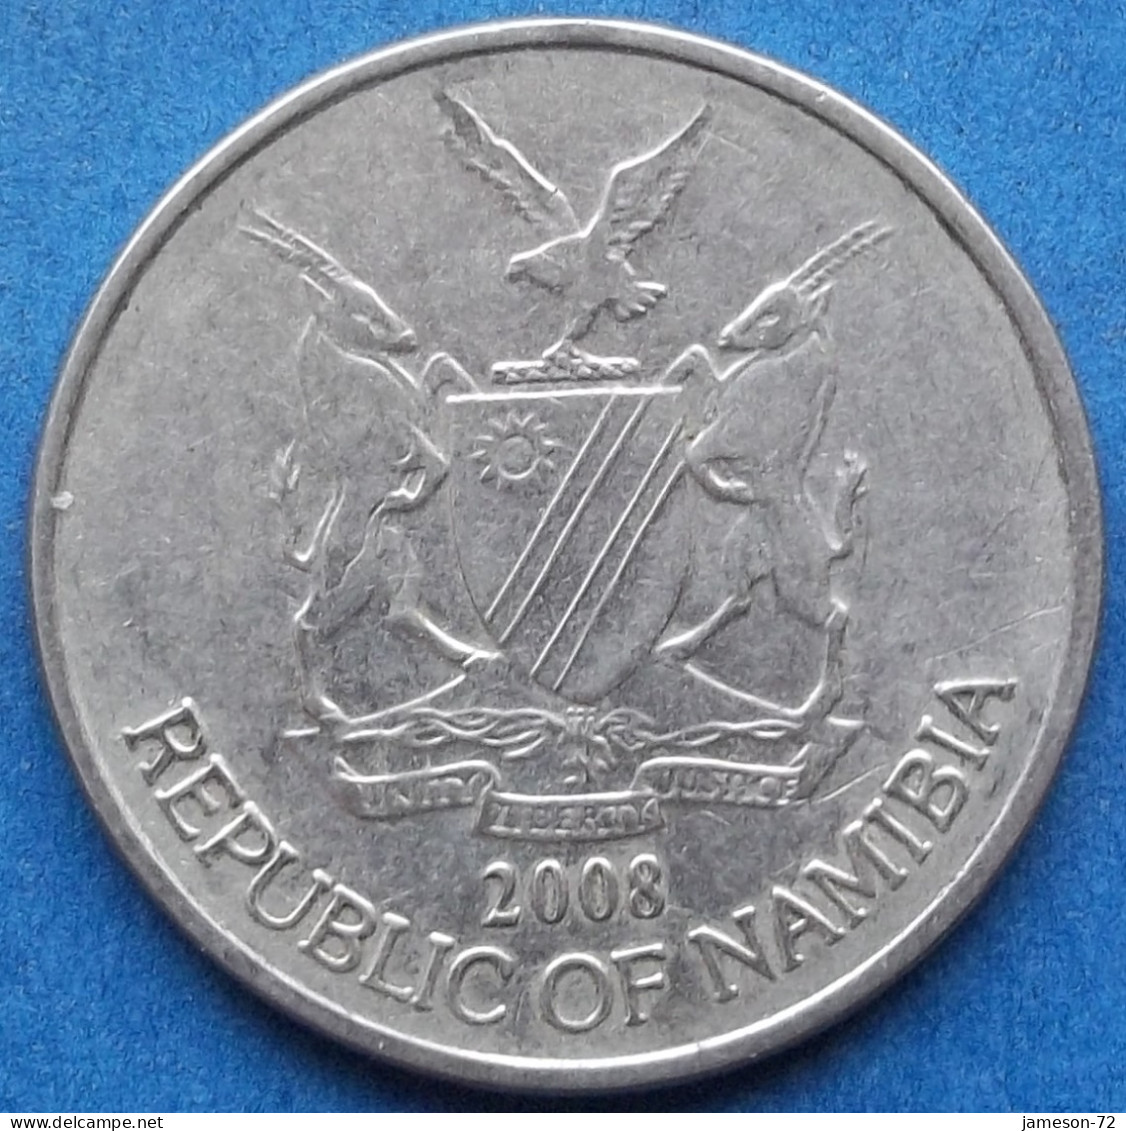 NAMIBIA - 50 Cents 2008 "Quiver Tree" KM# 3 Independent Republic (1990) - Edelweiss Coins - Namibia